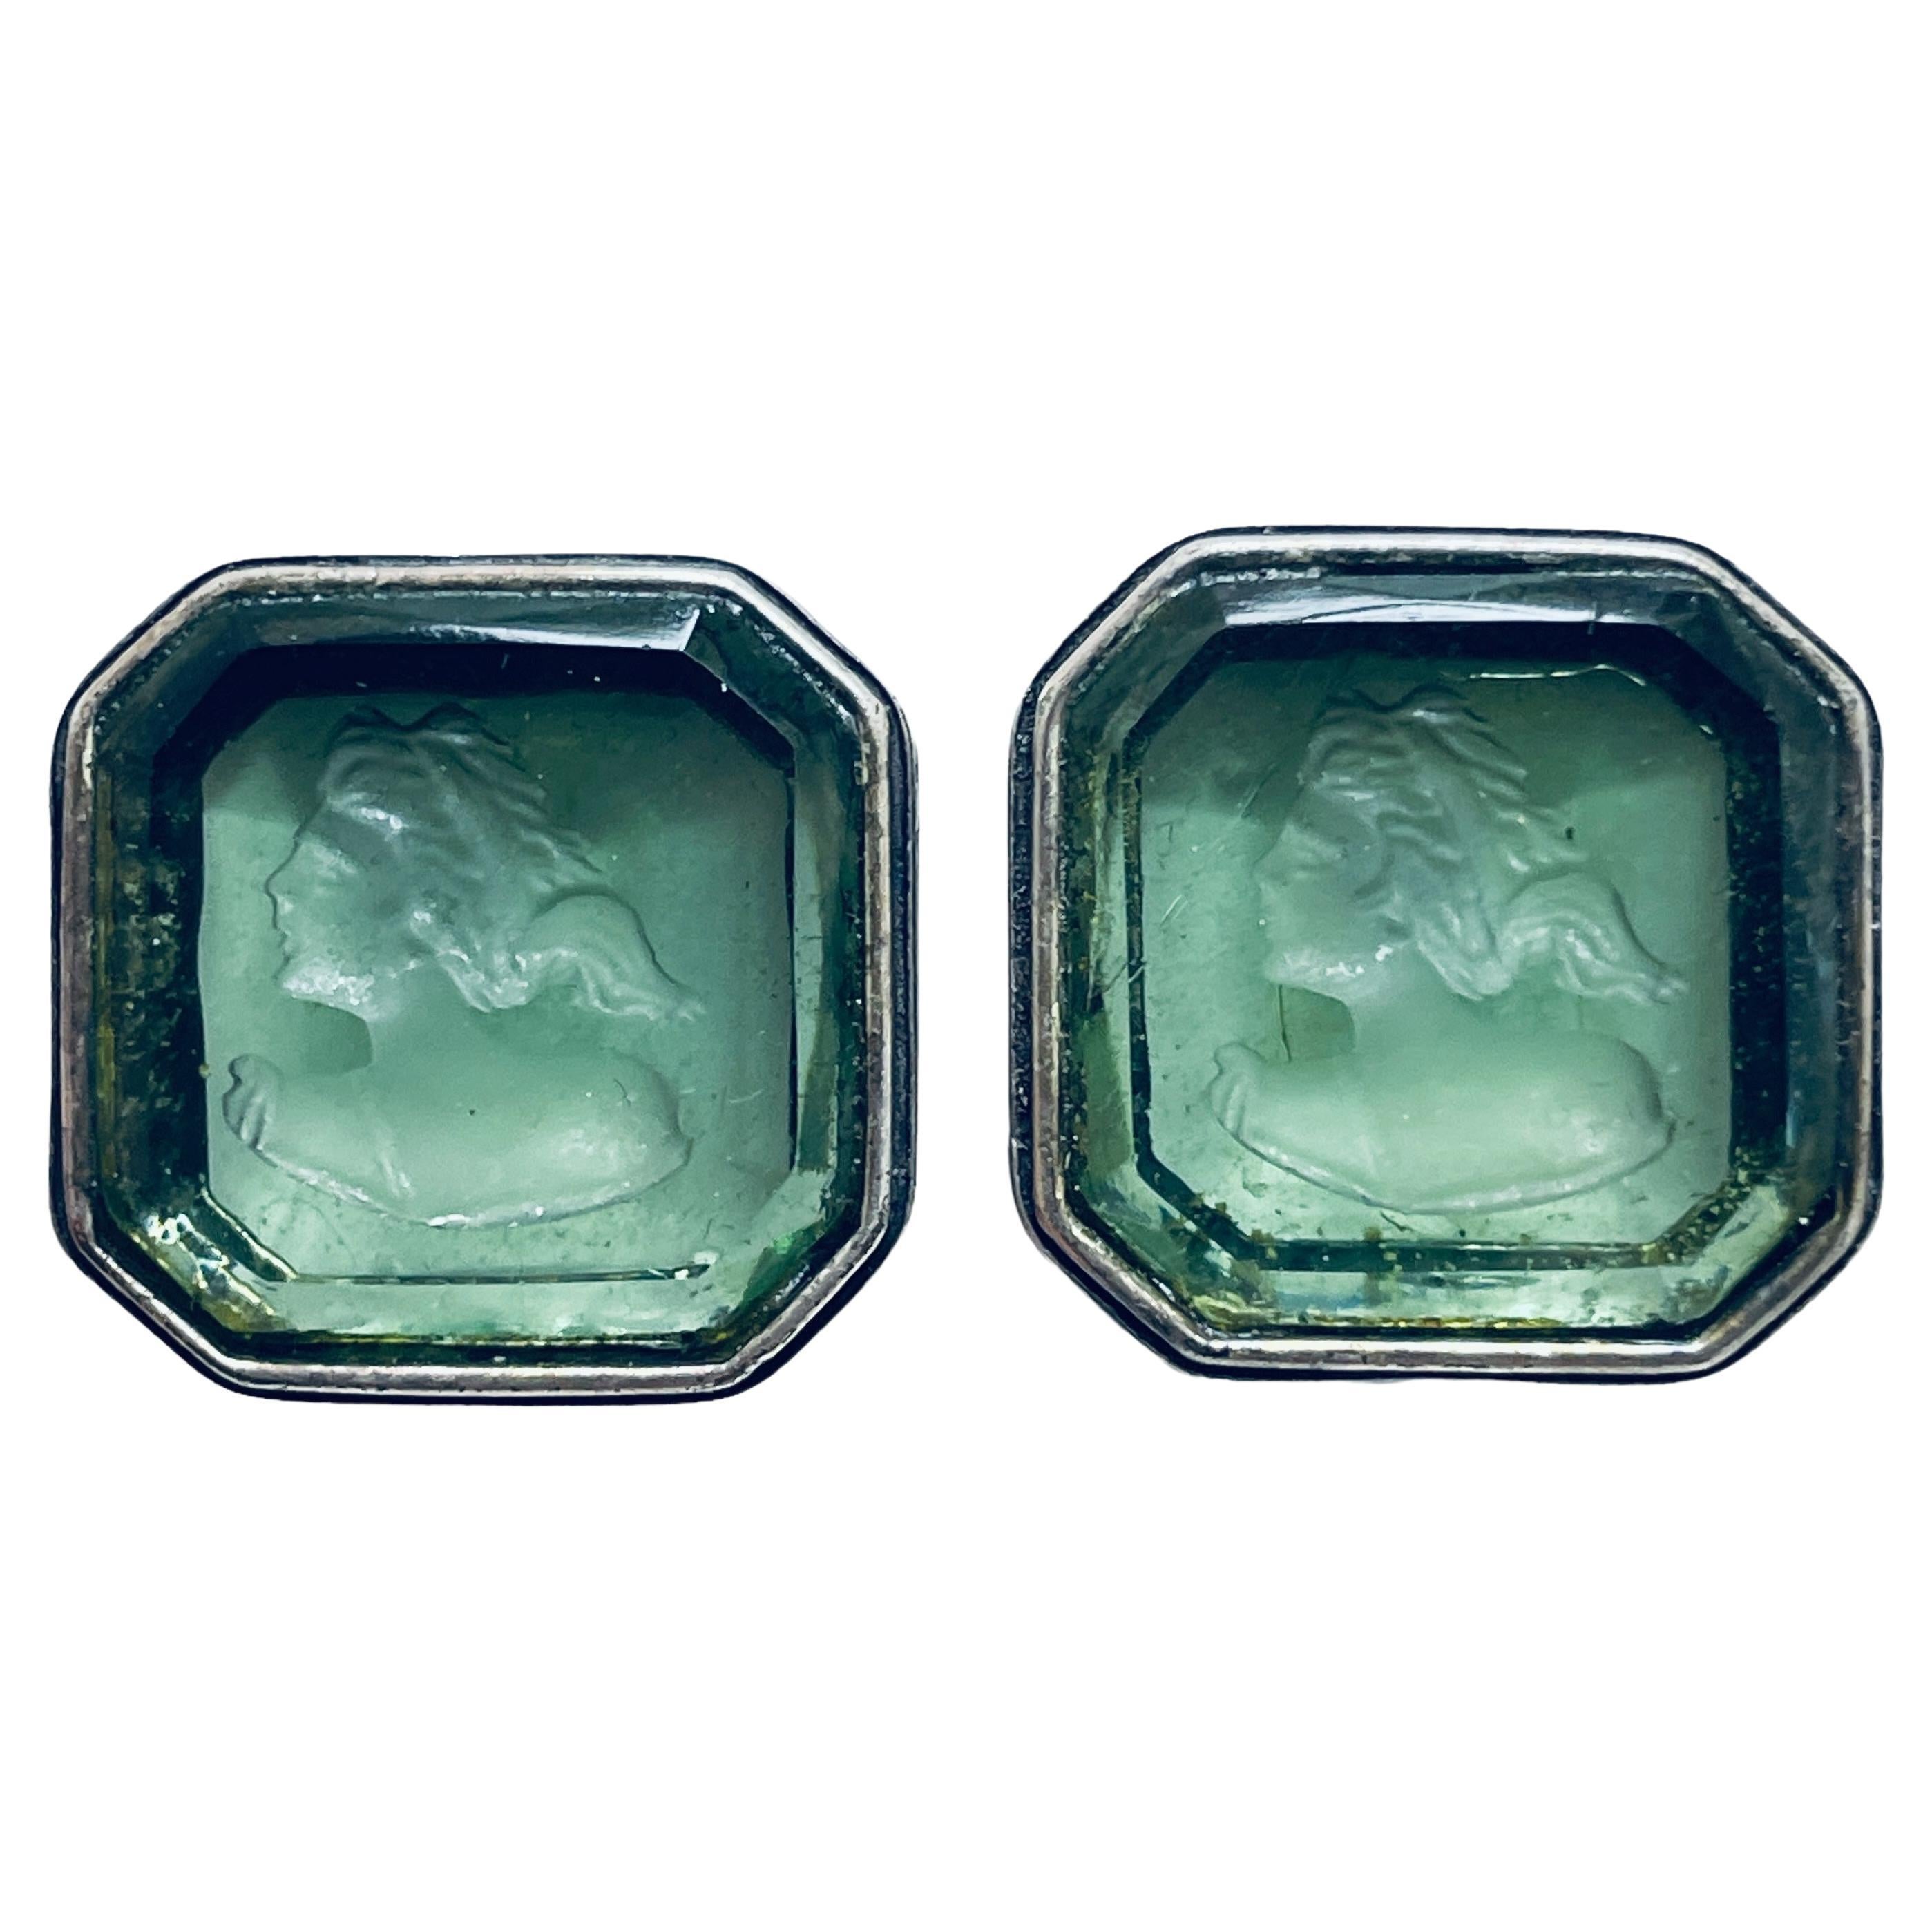 EXTASIA vintage silver tone green glass intaglio cameo designer clip on earrings For Sale